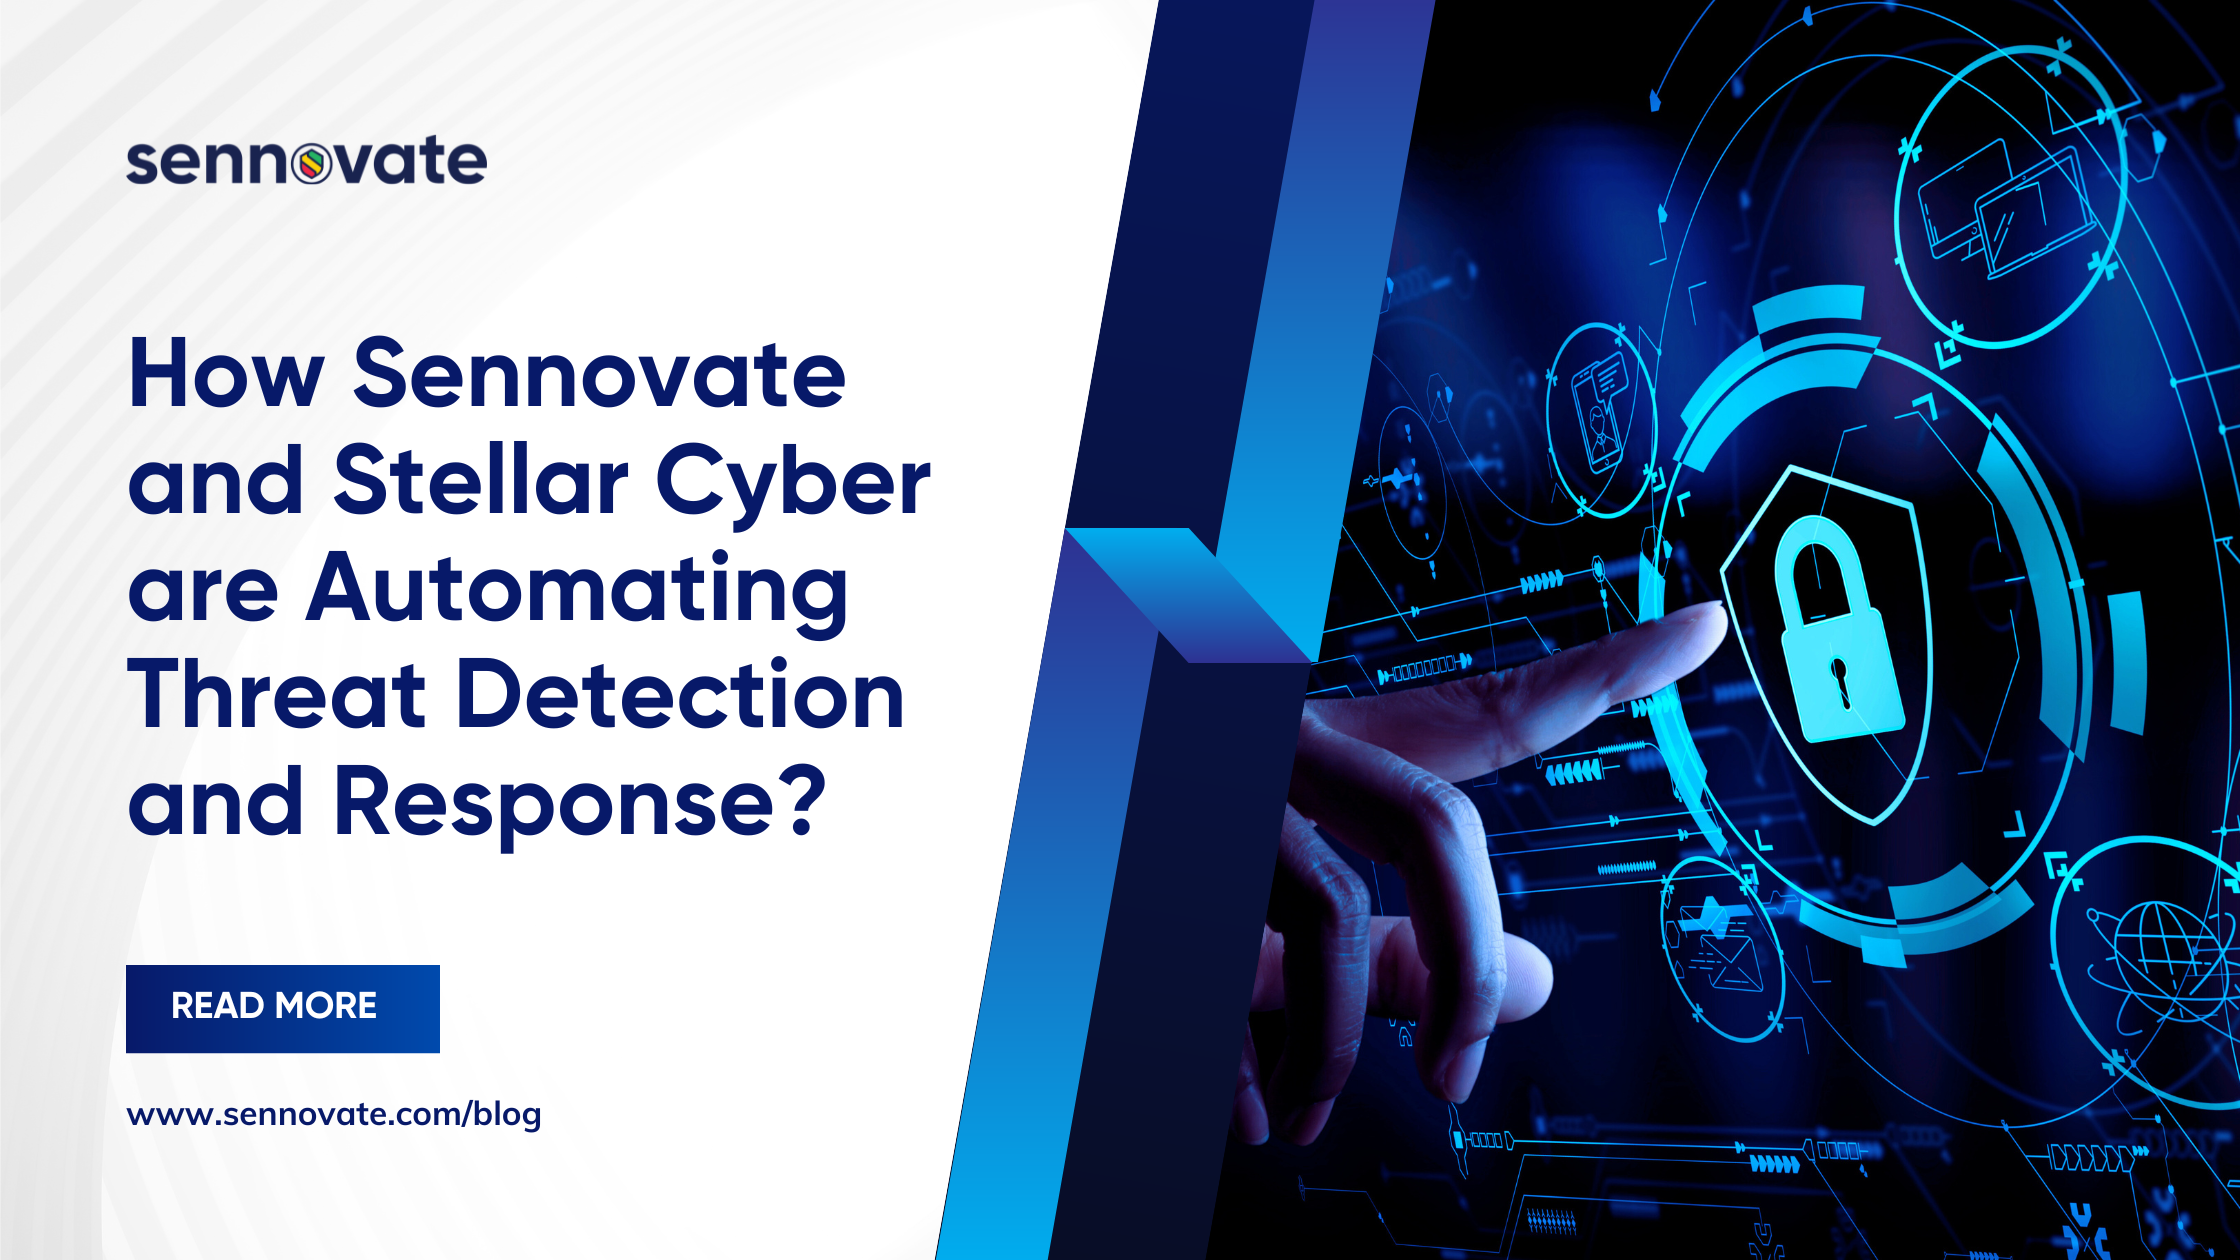 How Sennovate and Stellar Cyber are Automating Threat Detection and Response?